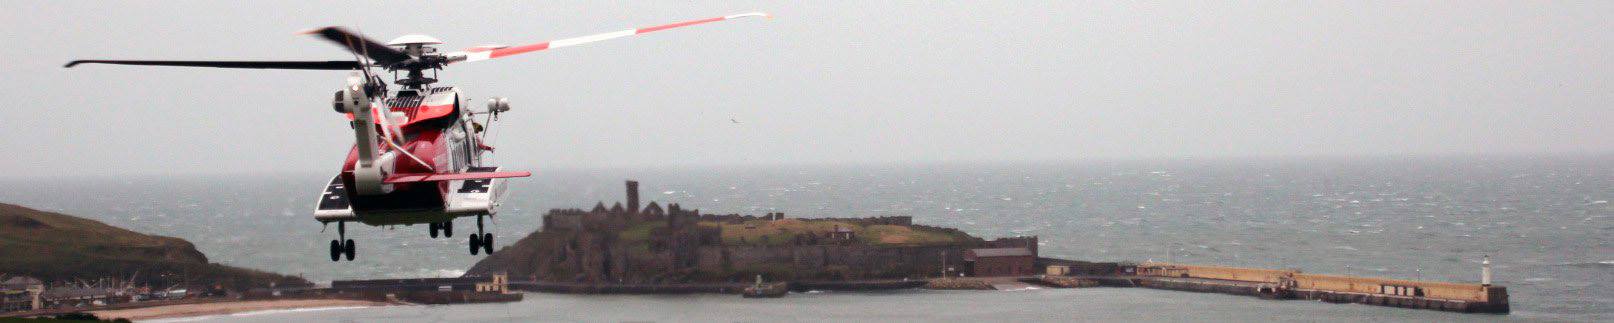 Helicopter and Peel Castle, by Dave Corkish